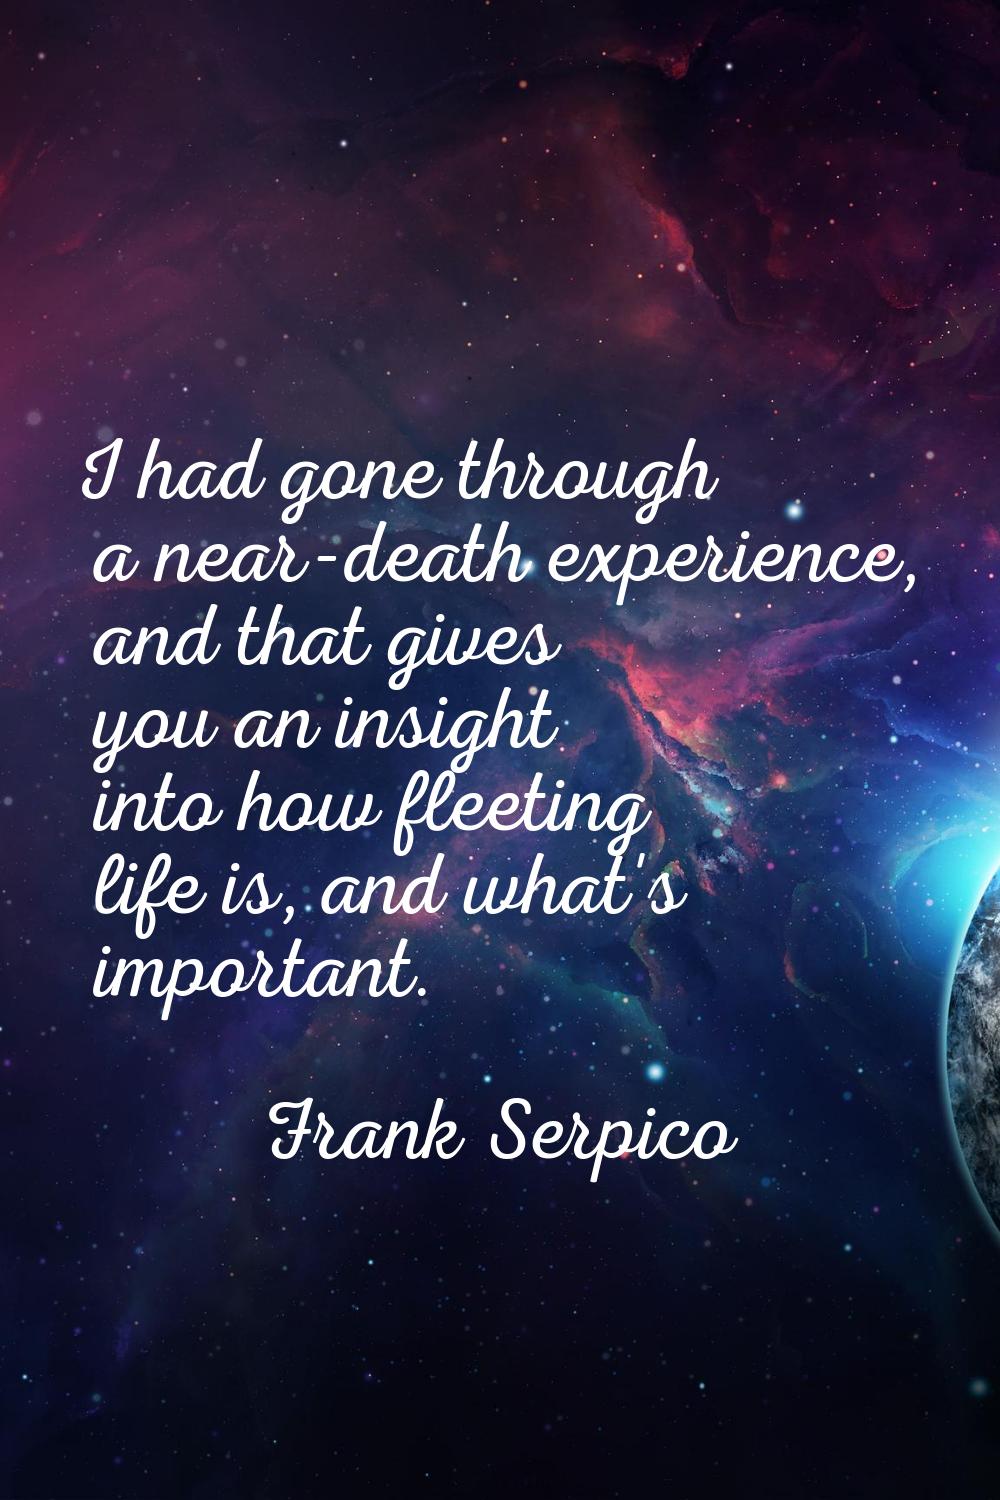 I had gone through a near-death experience, and that gives you an insight into how fleeting life is